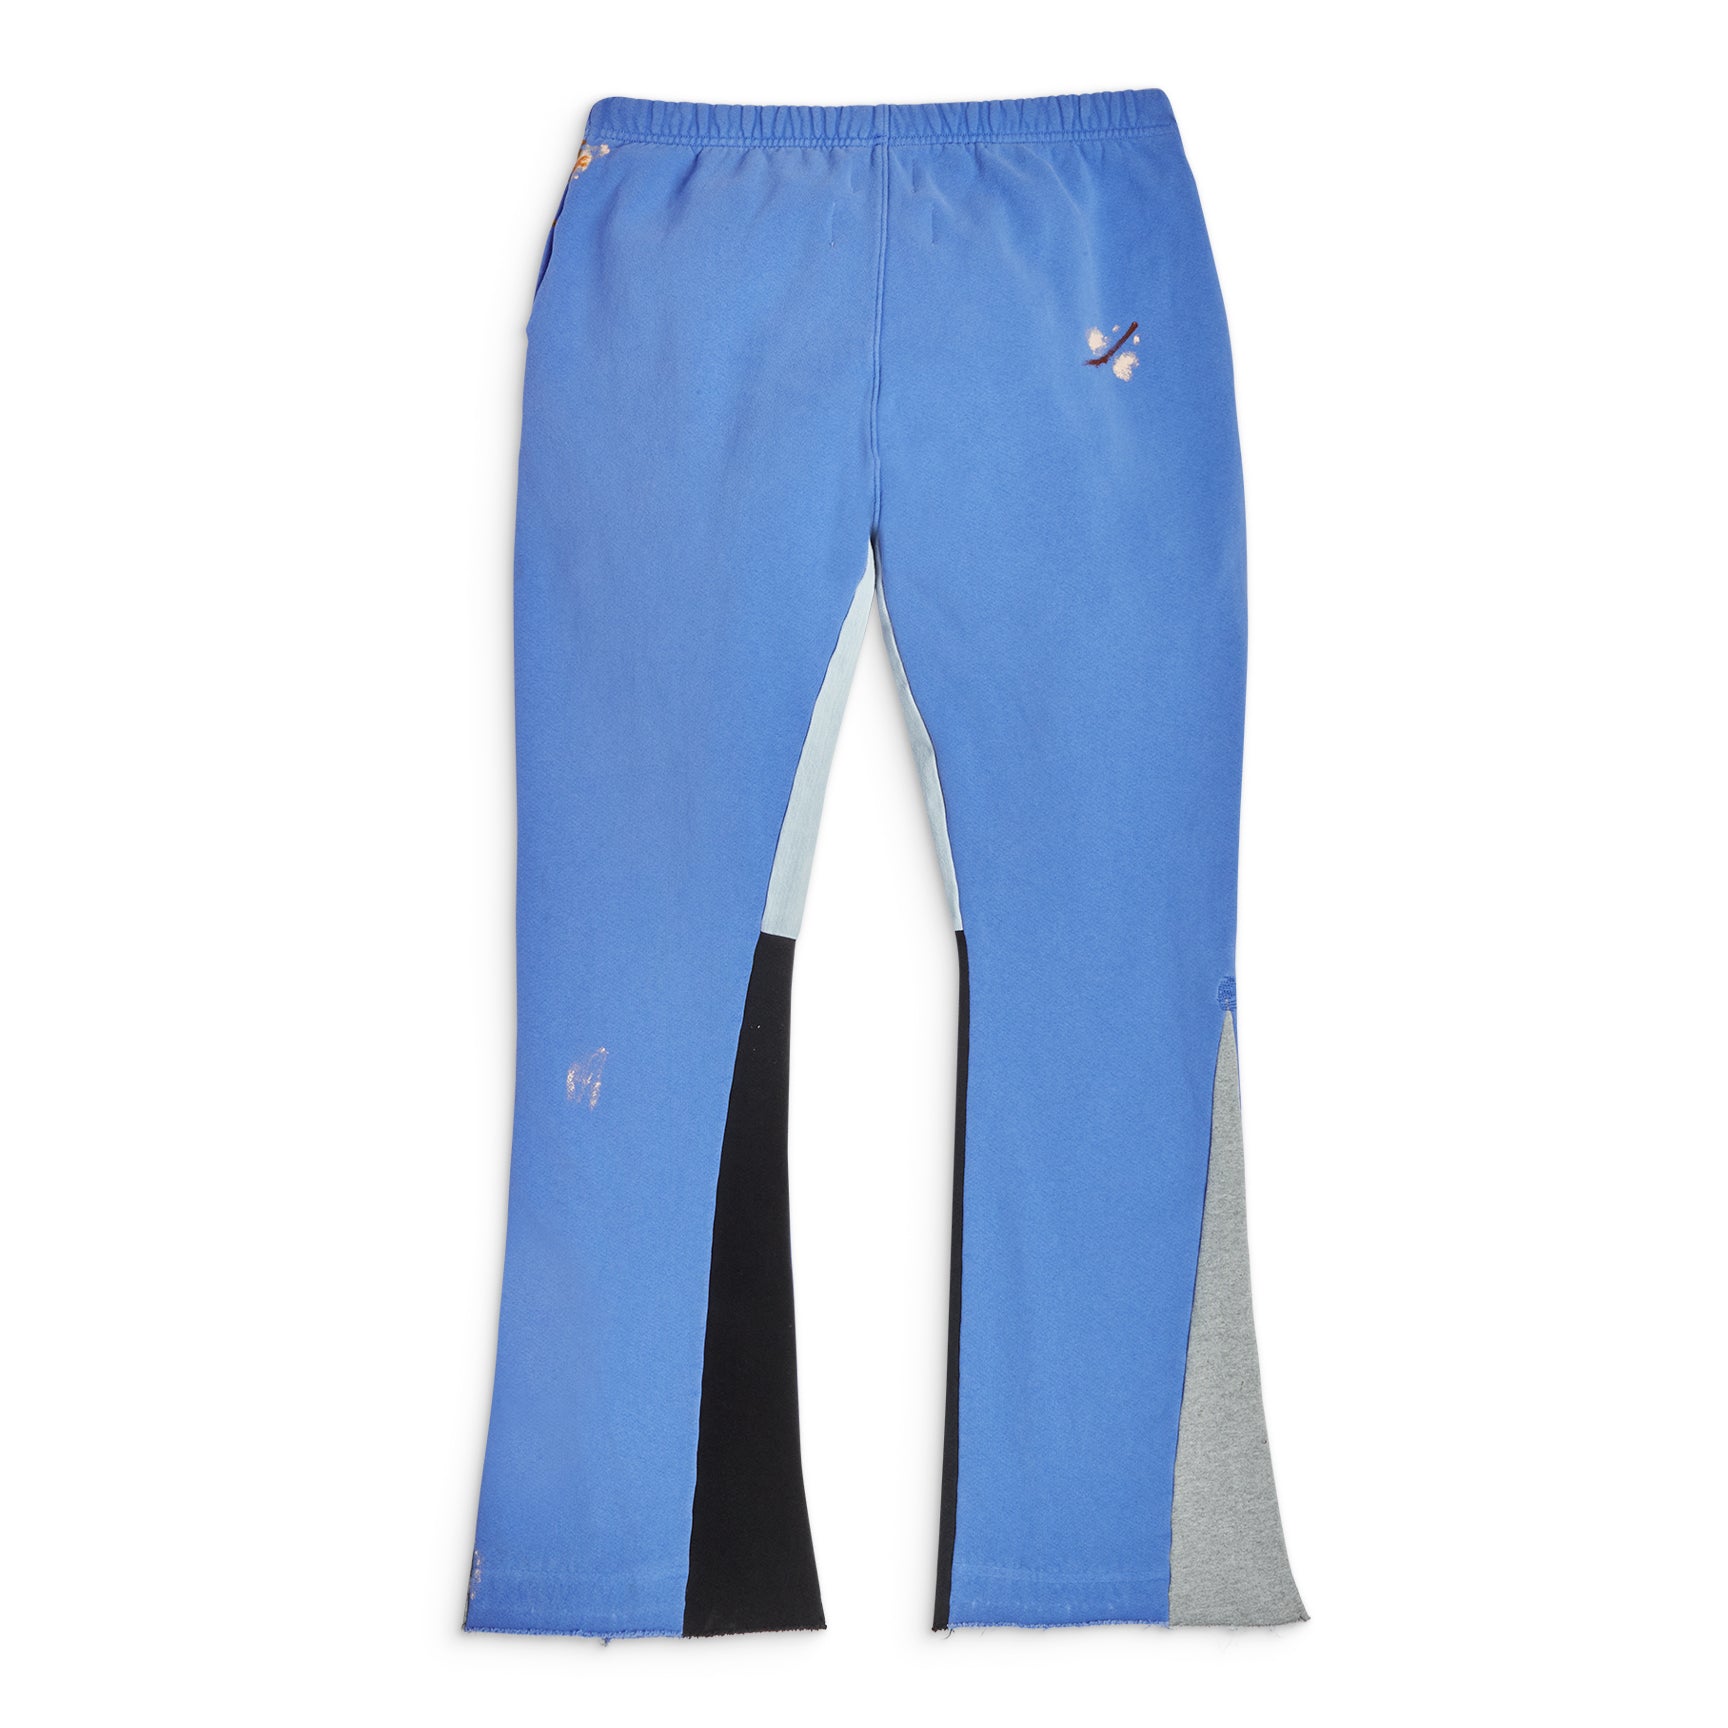 Gallery Dept. Painted Flare Sweat Pants Washed Blue